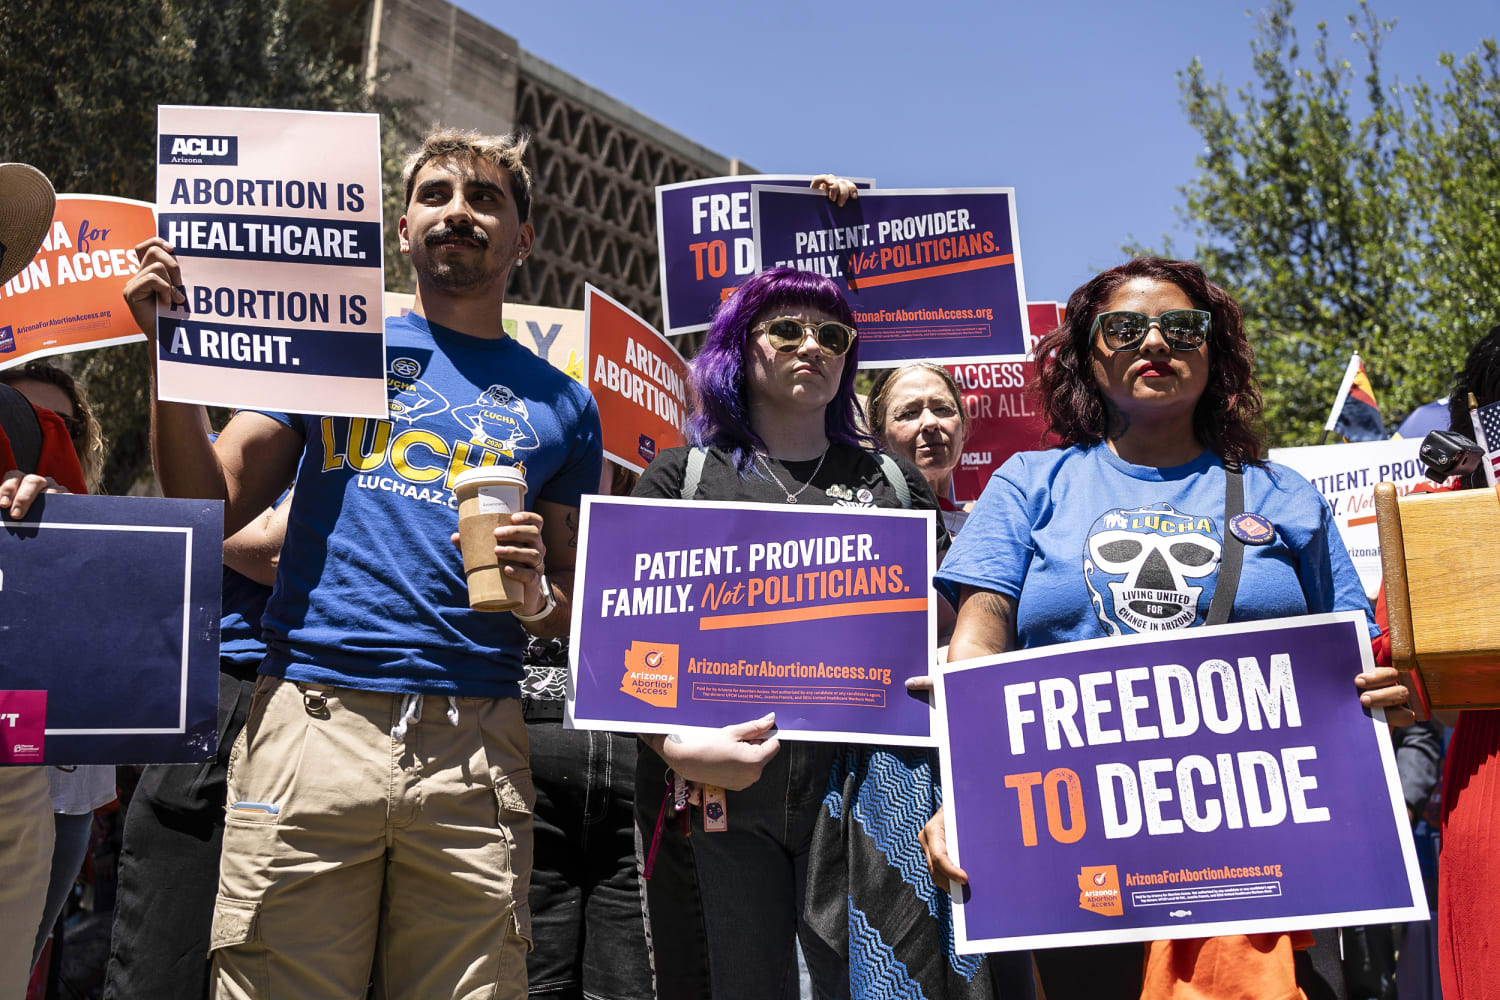 Arizona House Passes Bill to Repeal 1864 Abortion Ban After Two Previous Attempts Failed